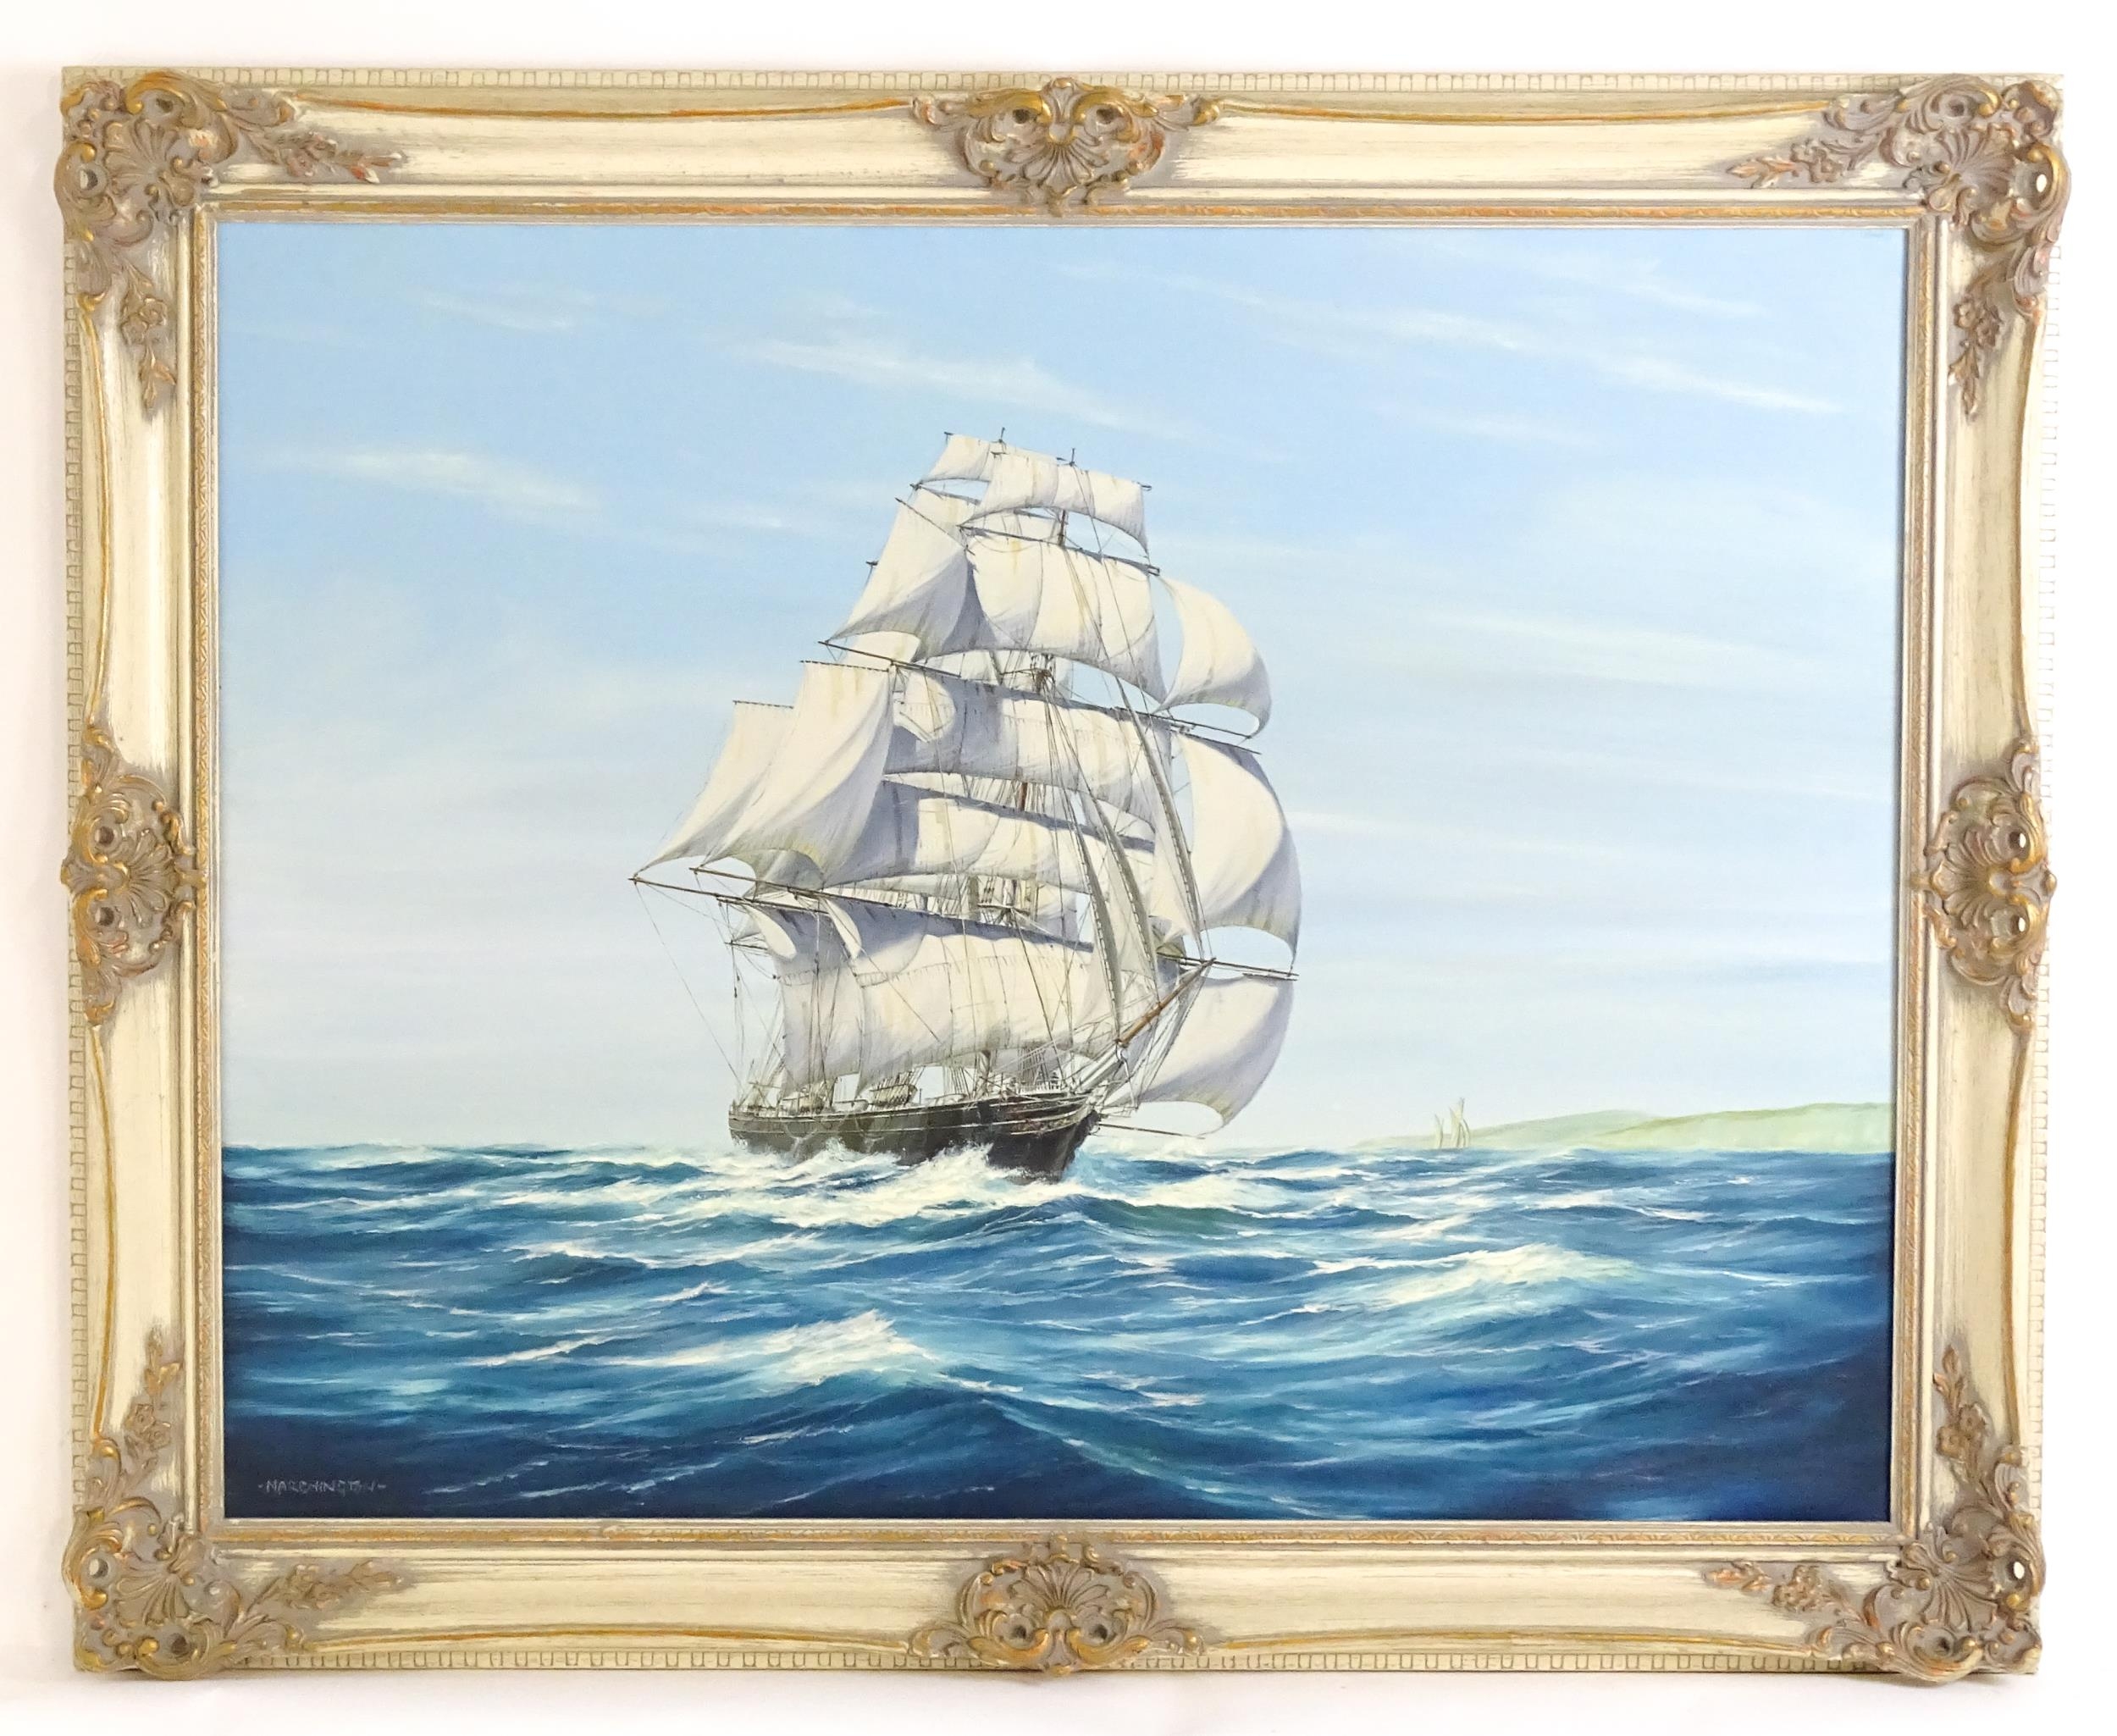 Philip Marchington, 20th century, Oil on canvas, A tall ship off the coast. Signed lower left.